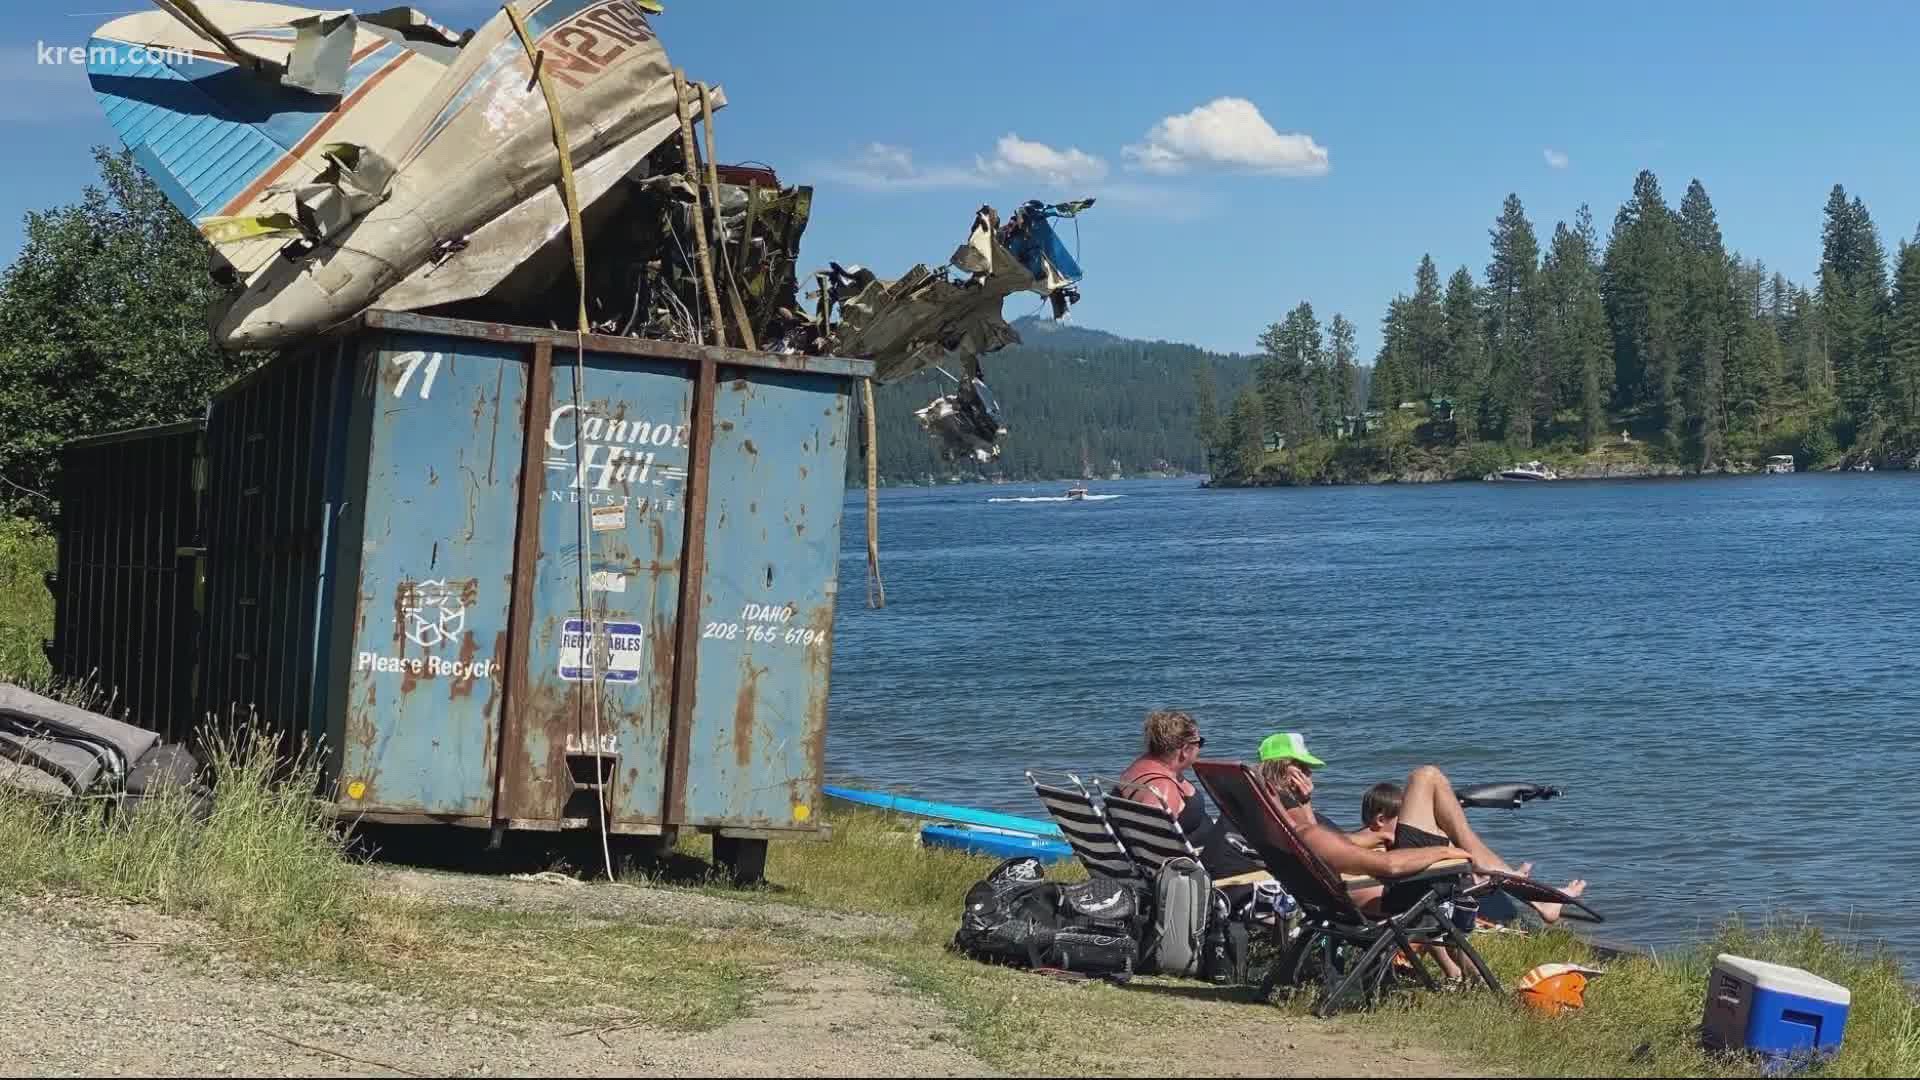 Viewer photos shared with KREM showed part of the wreckage being stored in dumpsters out in the open and people swimming in the lake just feet away.